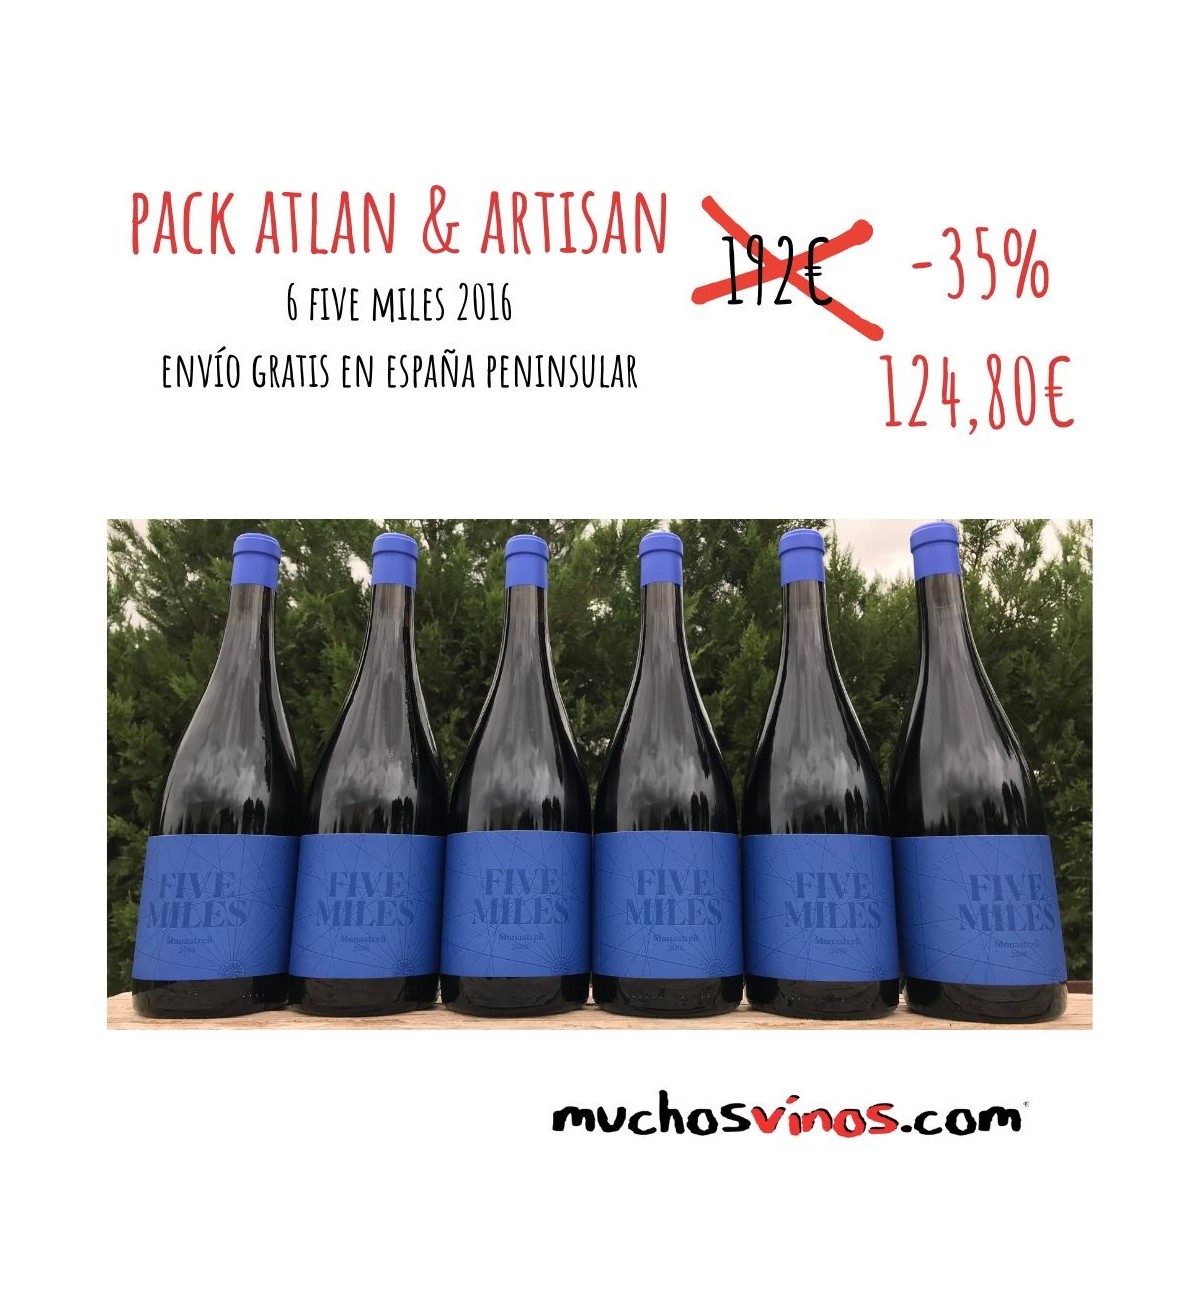 Pack Atlan And Artisan - 6 x Five Miles 2016 by muchosvinos.com